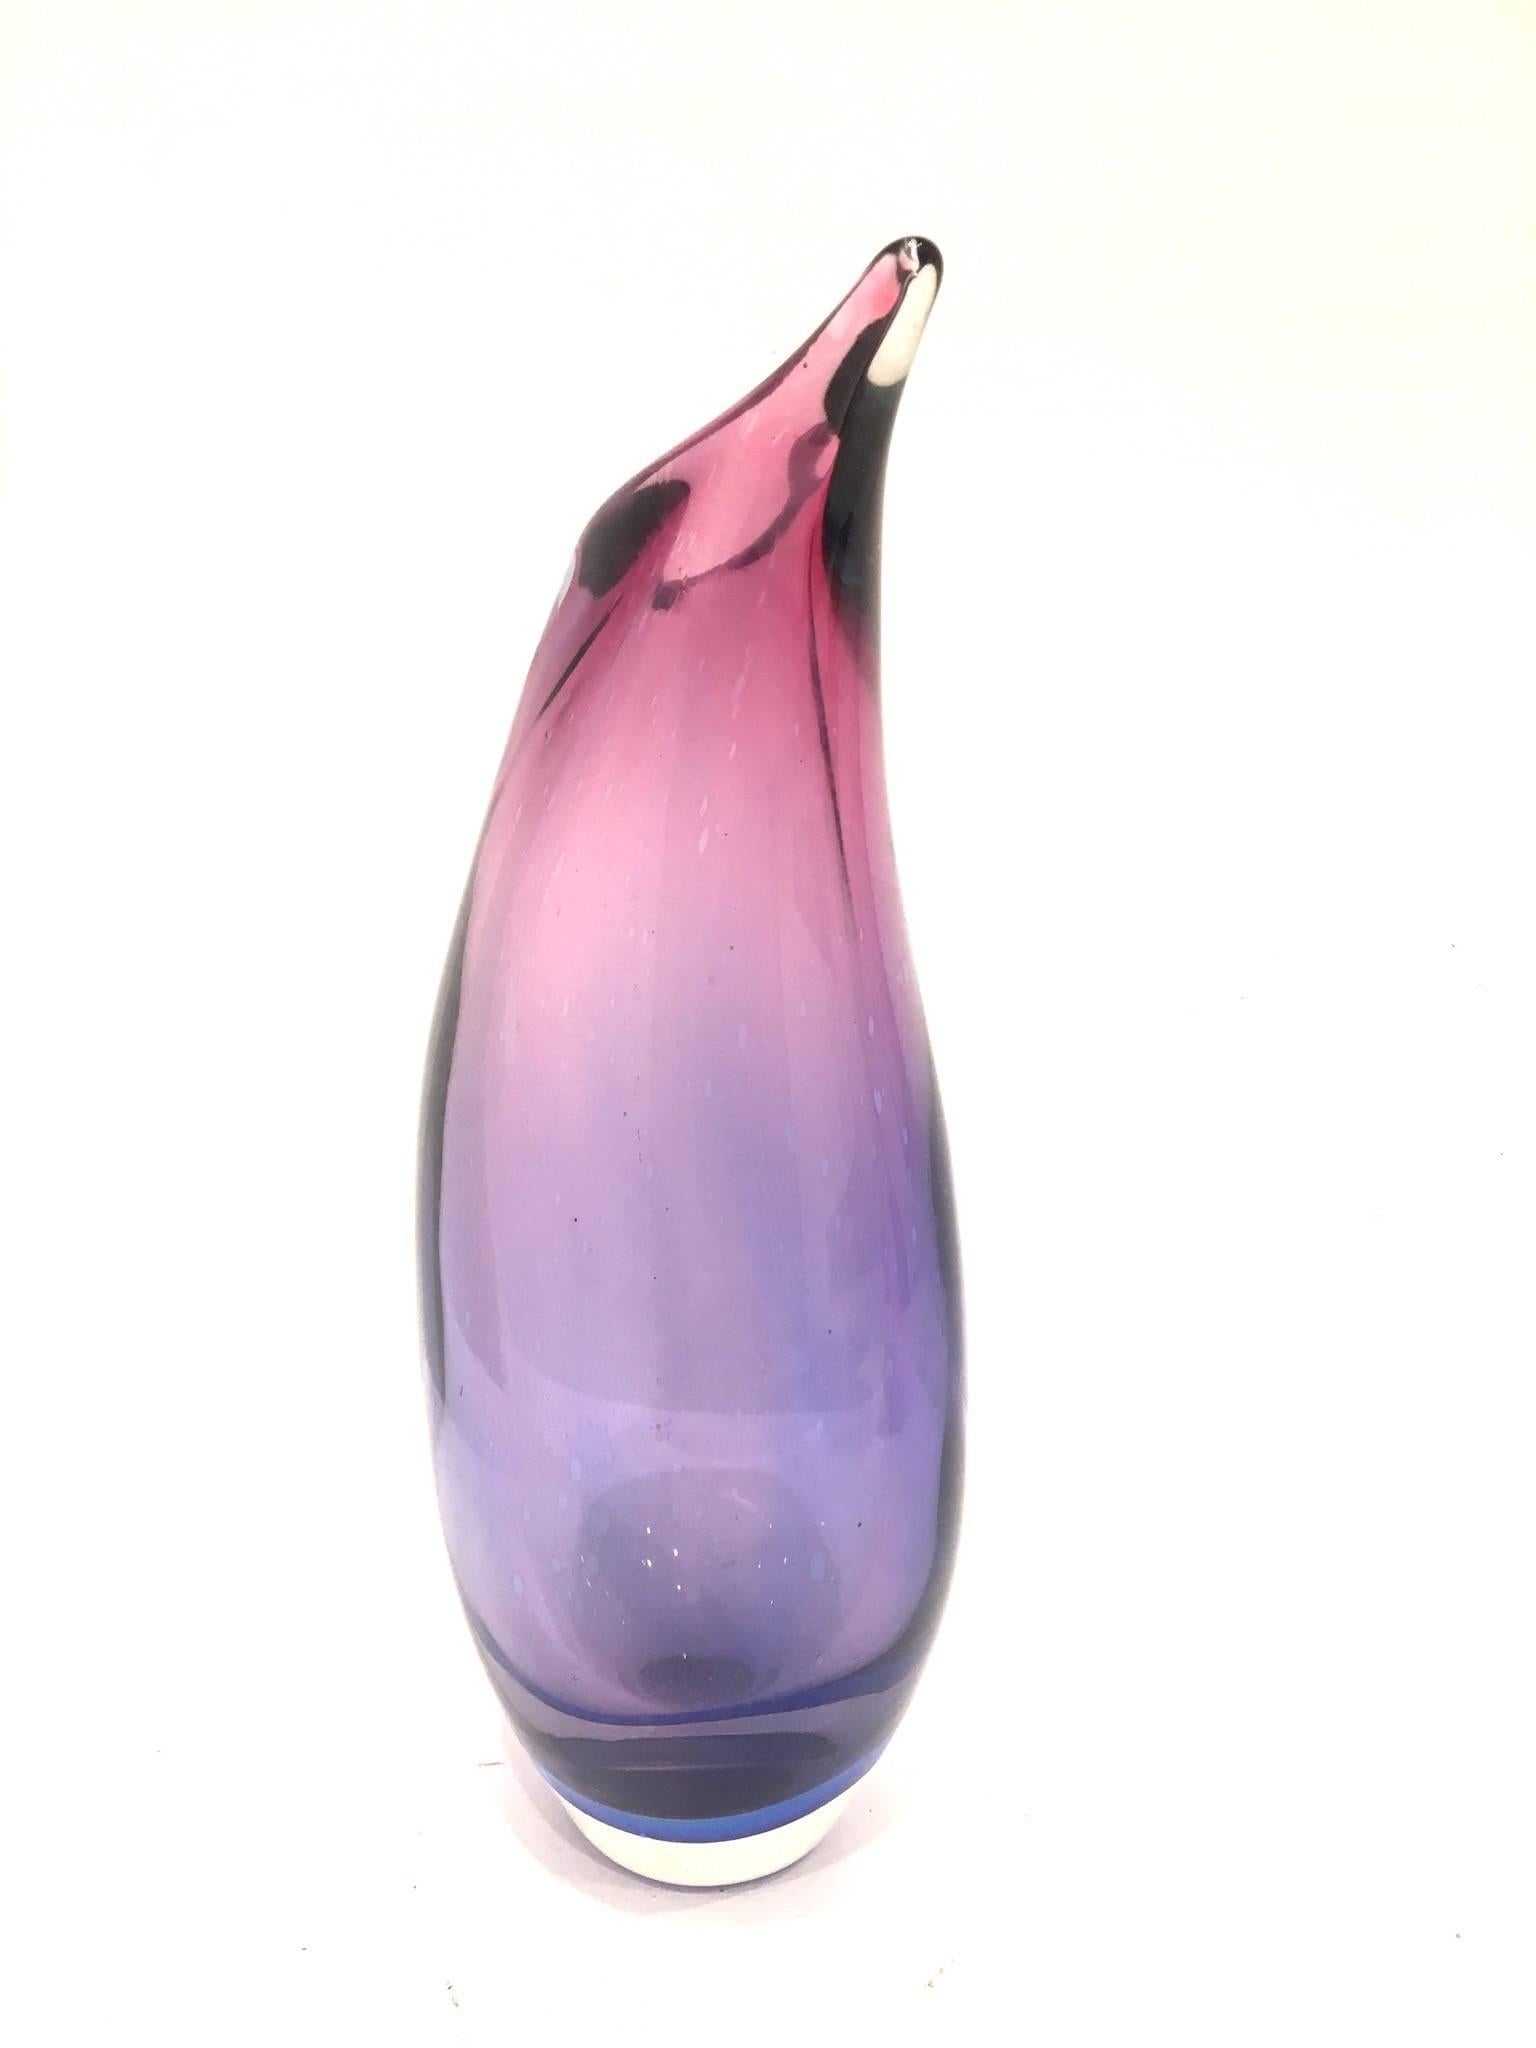 Whimsical purple and blue Sommerso glass vase. An art glass work attributed to Flavio Poli. Amazing shape and vibrant colors. circa 1950s.